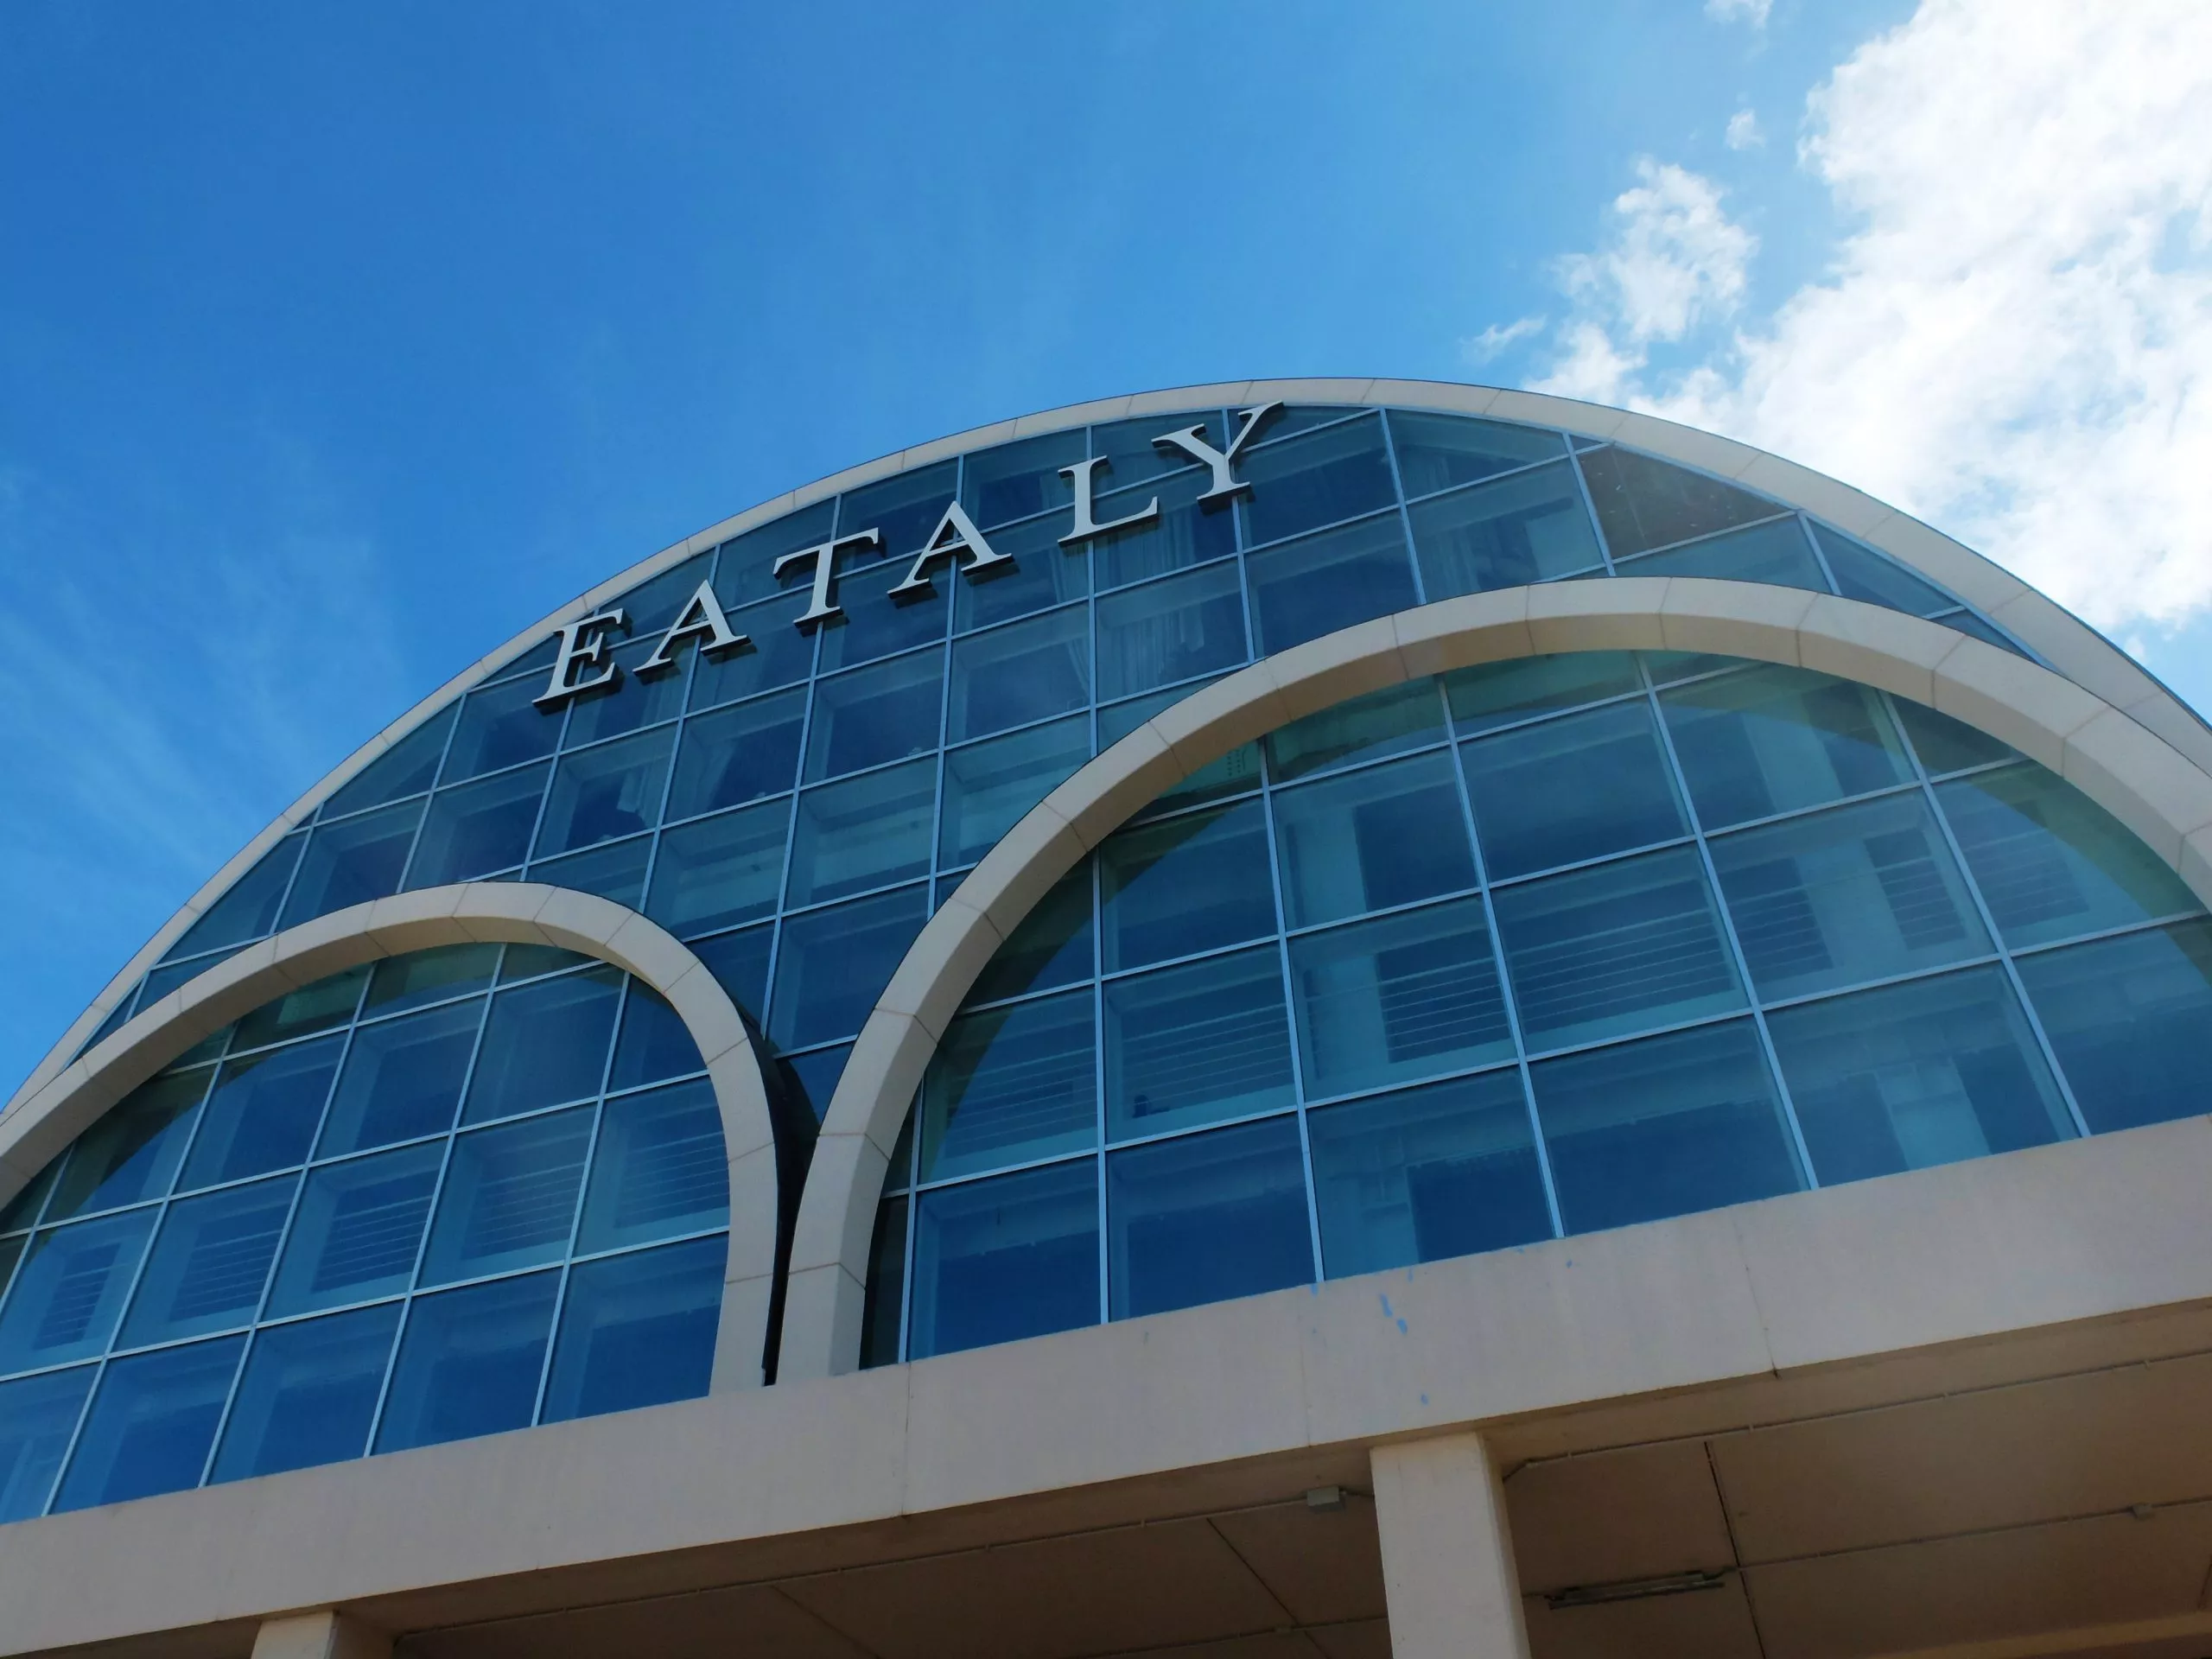 Eataly in Italy, europe | Organic Food,Dairy,Groceries,Seafood,Meat - Country Helper